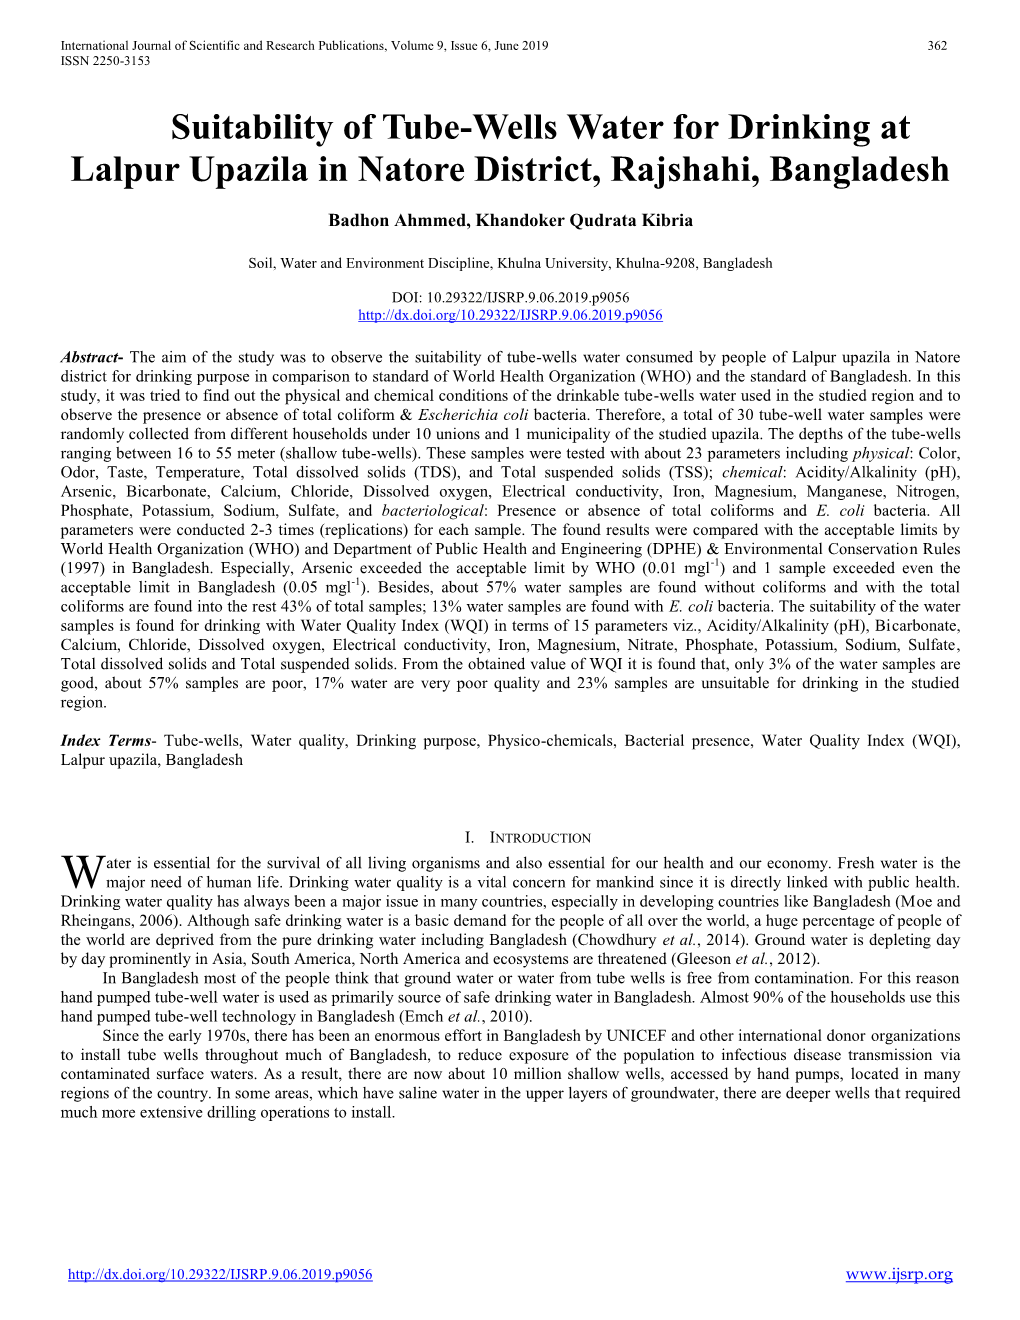 Suitability of Tube-Wells Water for Drinking at Lalpur Upazila in Natore District, Rajshahi, Bangladesh